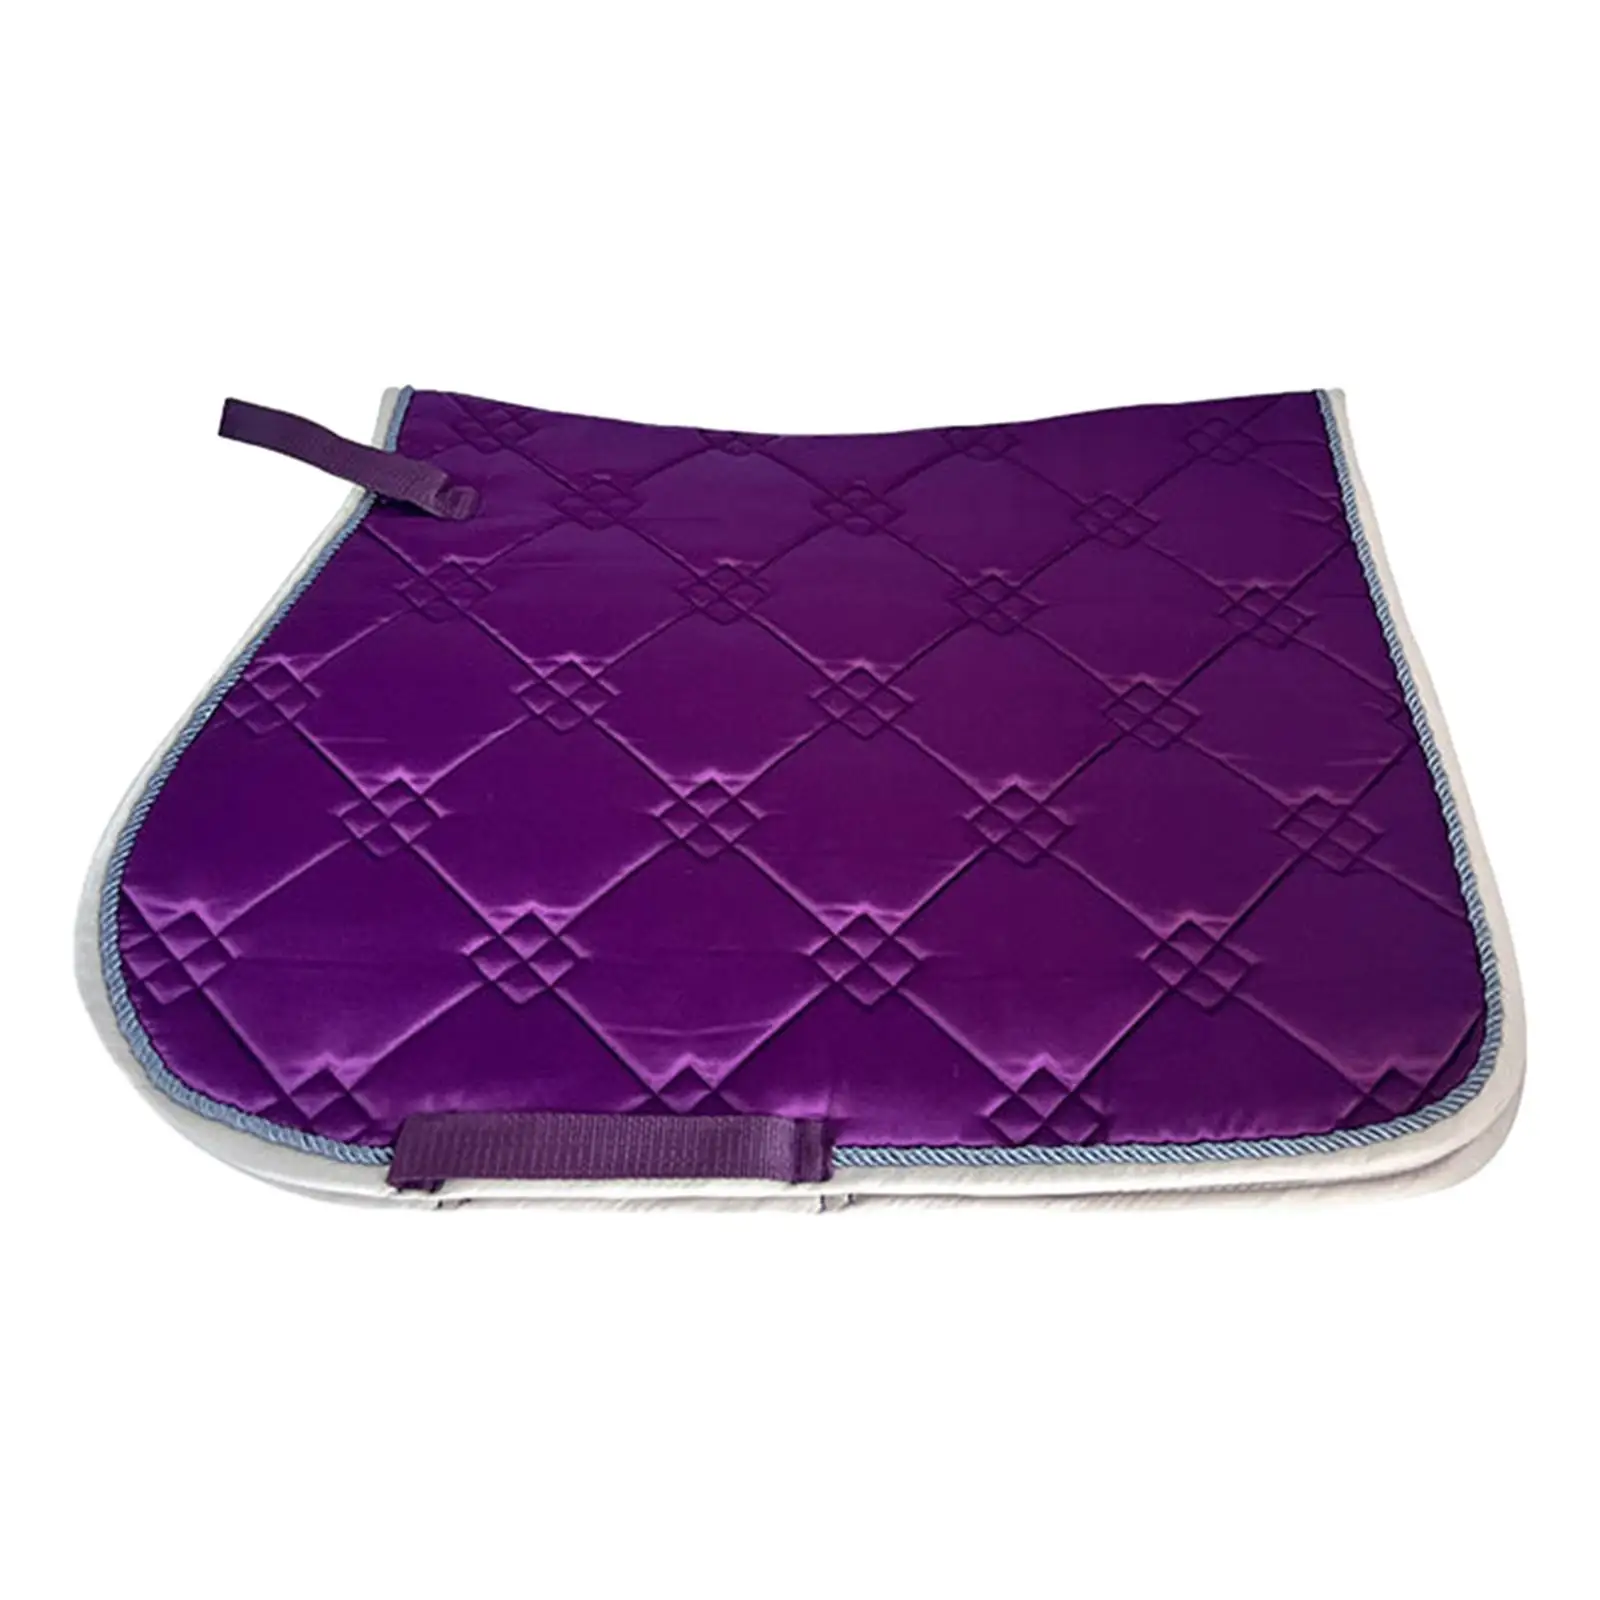 Saddle Pad for Horse Dressage Pad Riding Padding Sports Soft Protection Nonslip Portable Shock Absorbing